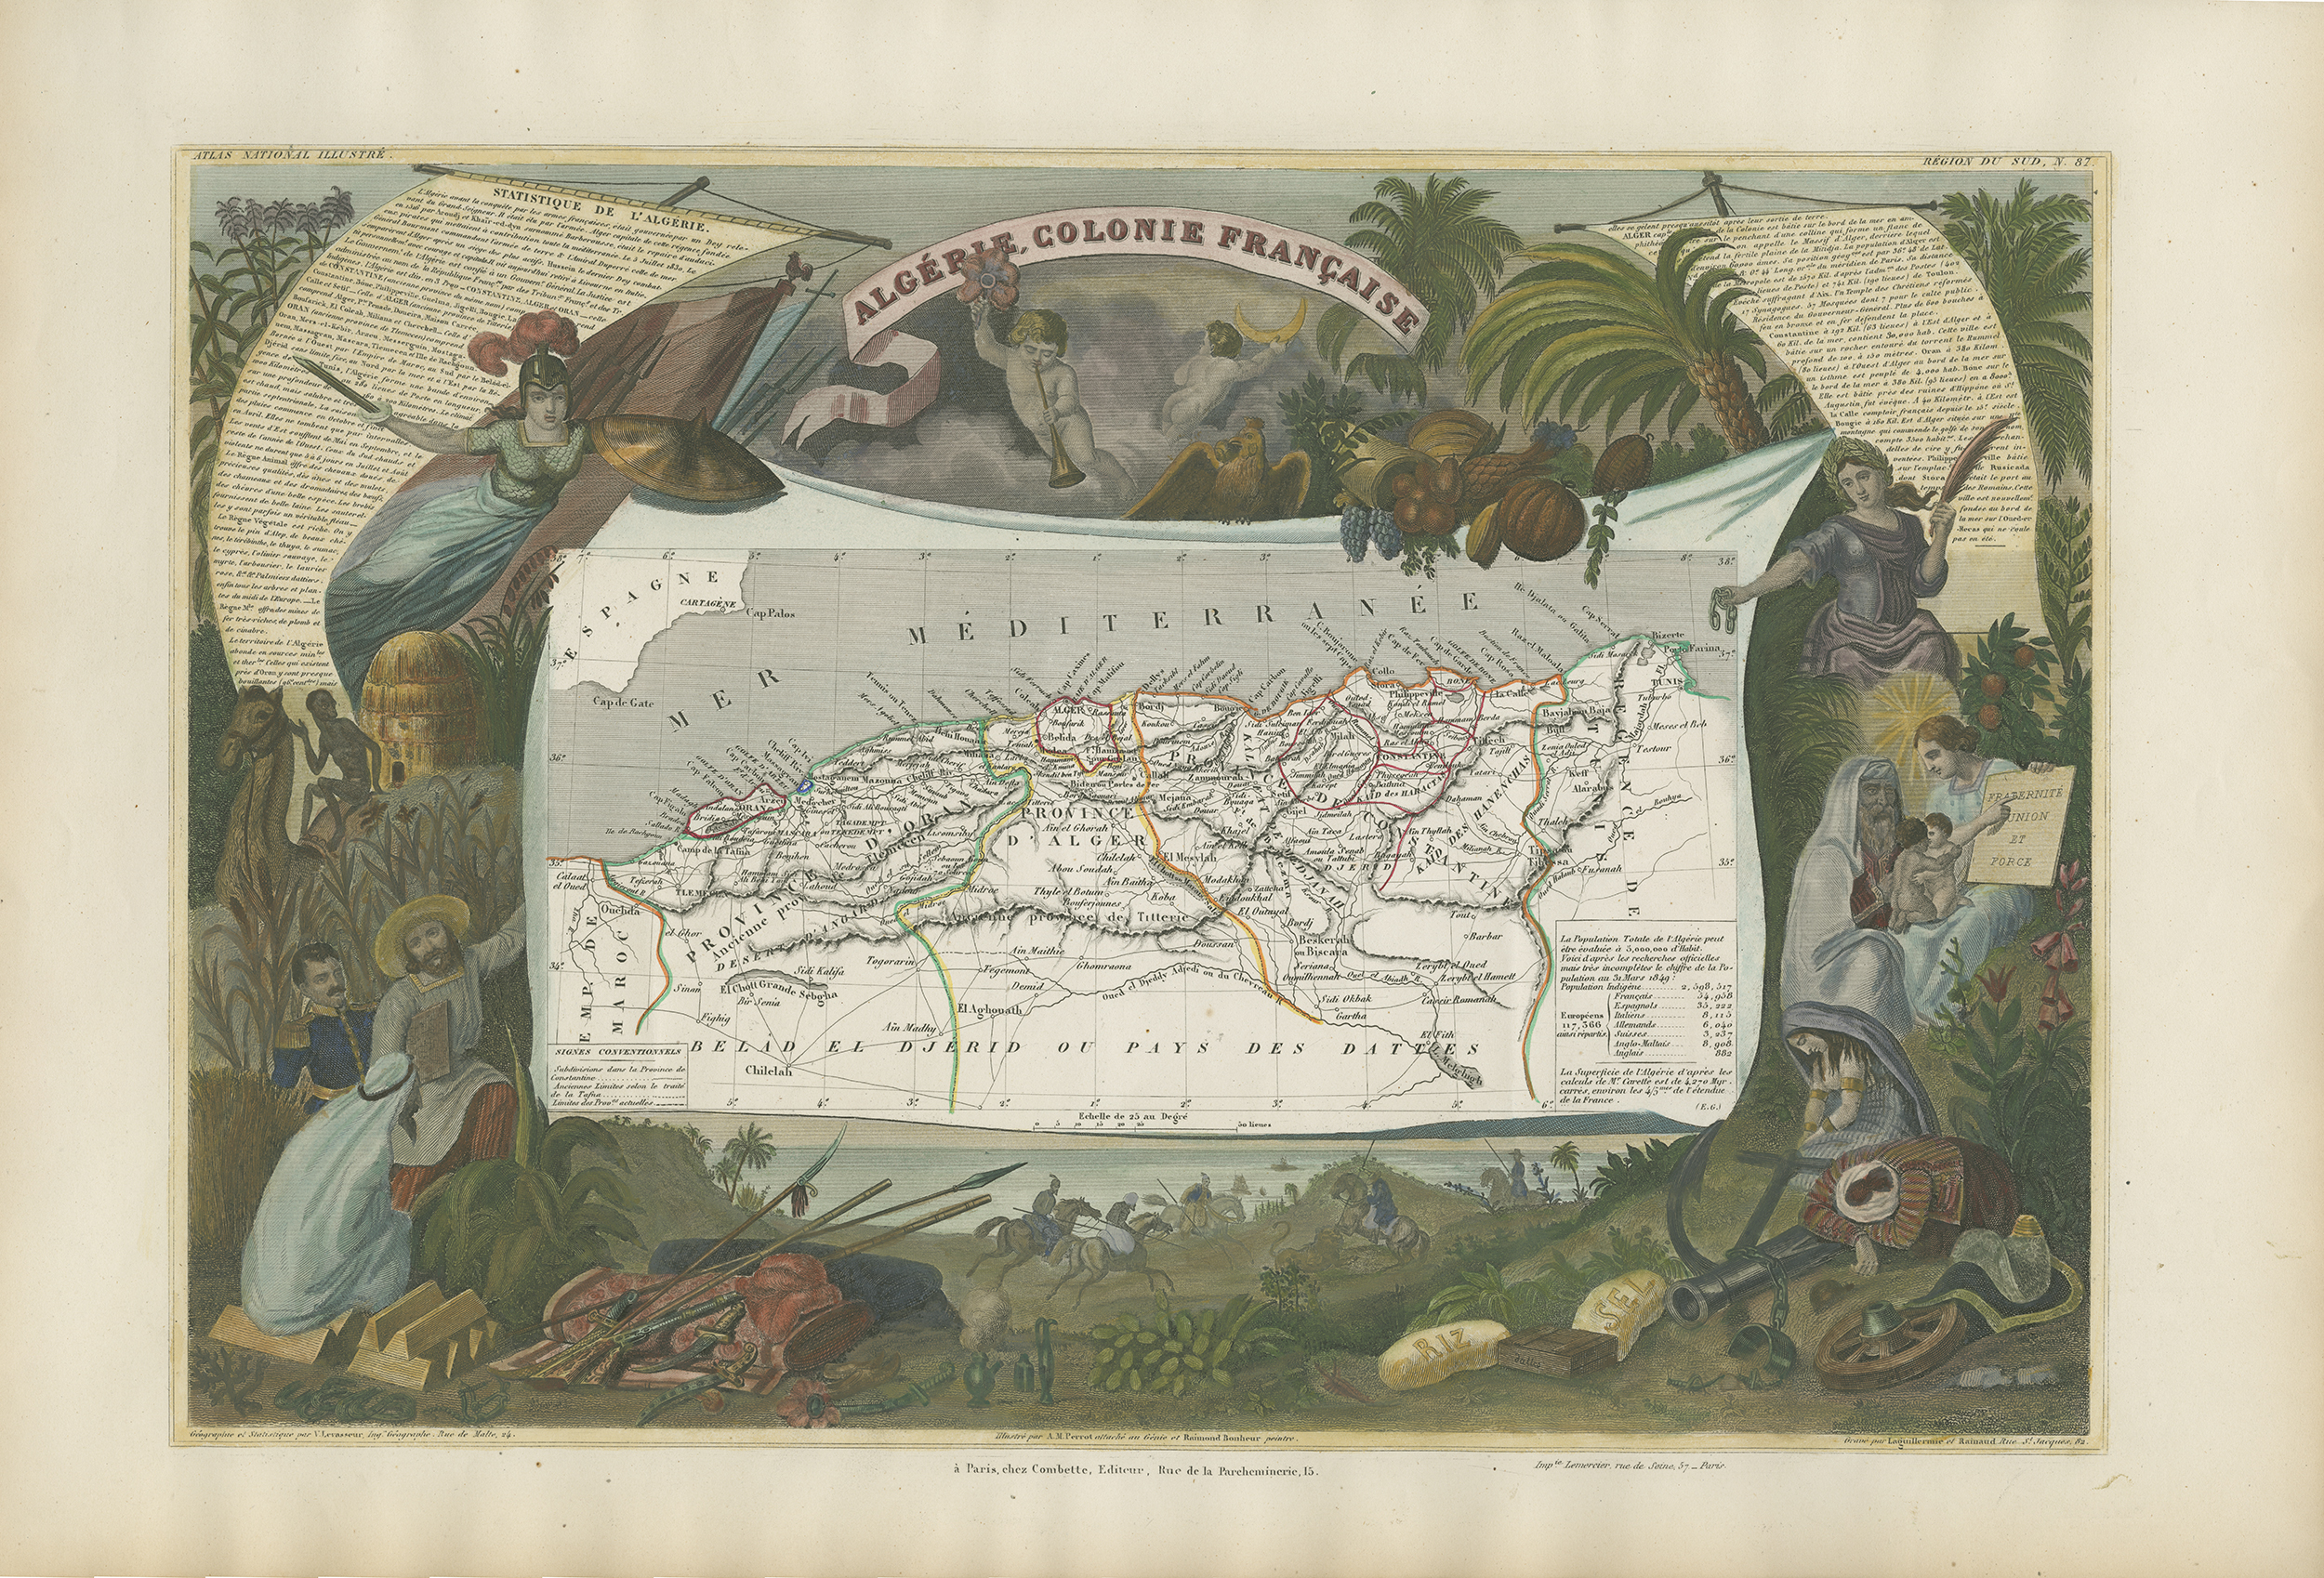 A map of Africa, with decorative illustrations on all edges depicting various scenes and animal life